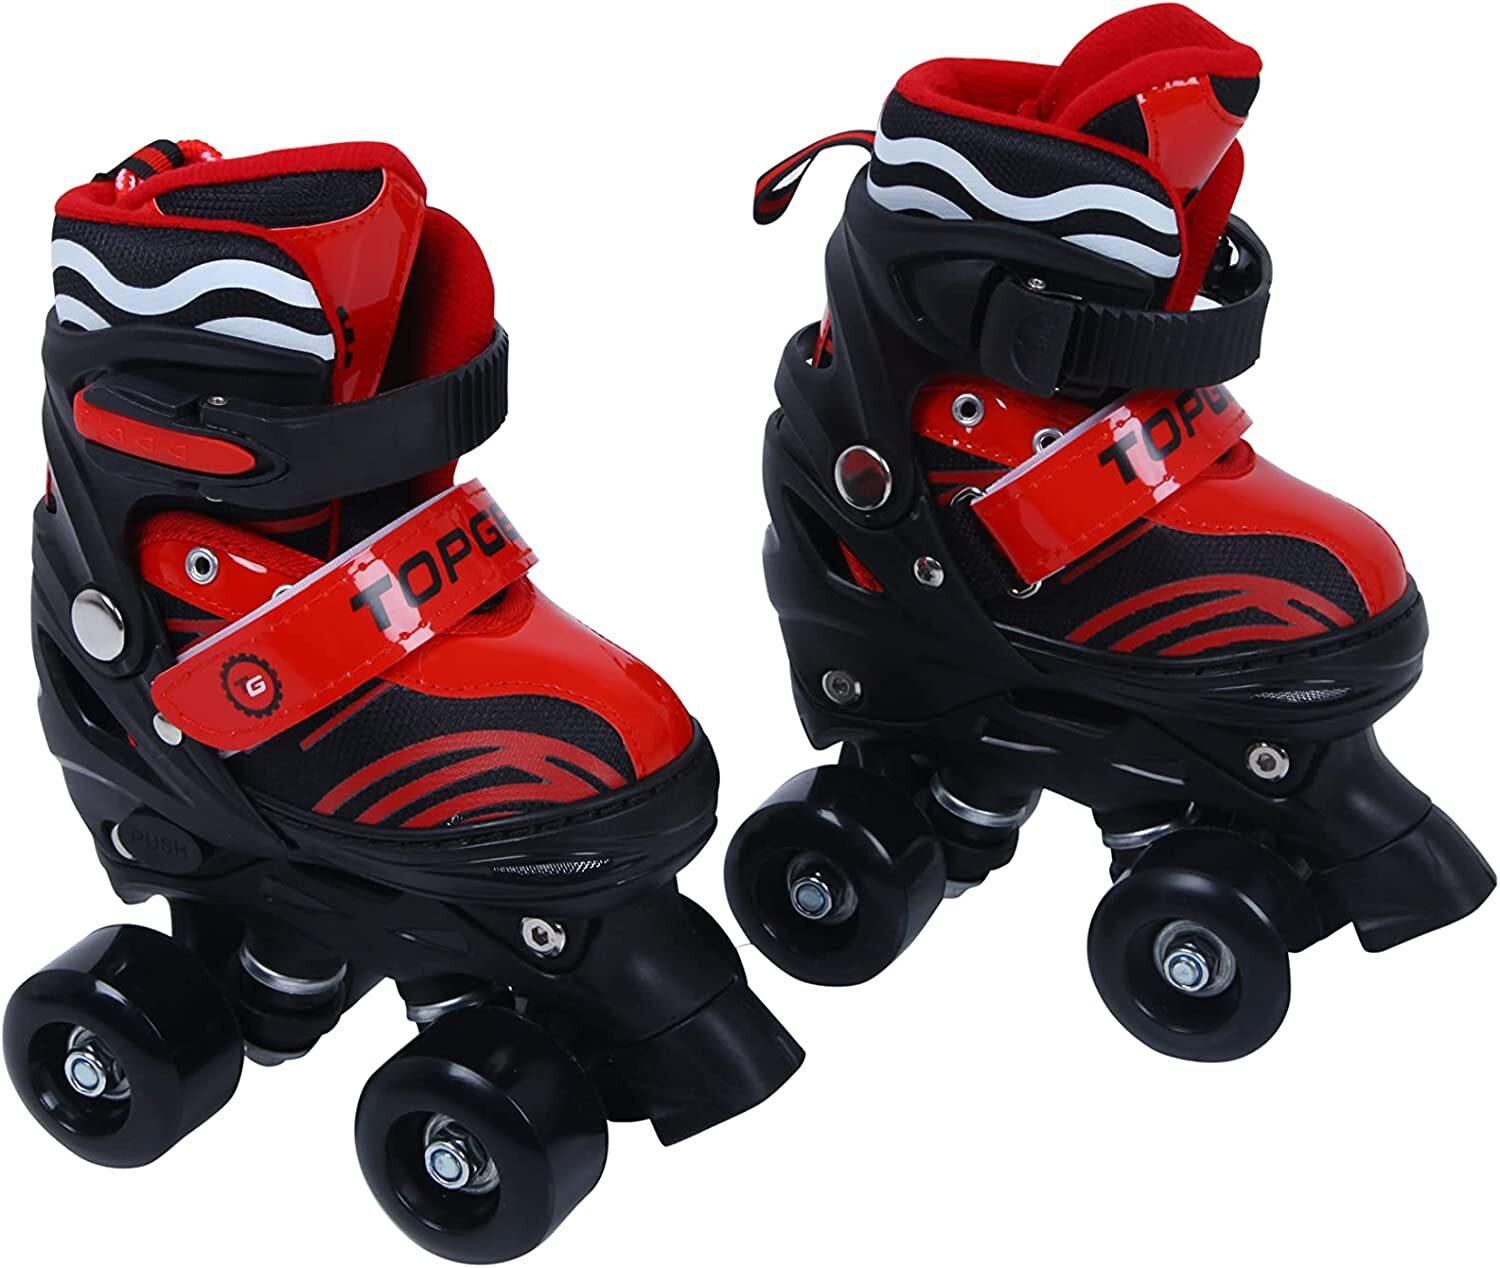 Top Gear Roller Skates Shoes, TG 9008, Adjustable For Kids, Double Row 4 Wheel With All Wheels, Fun For Kids, Red, Small